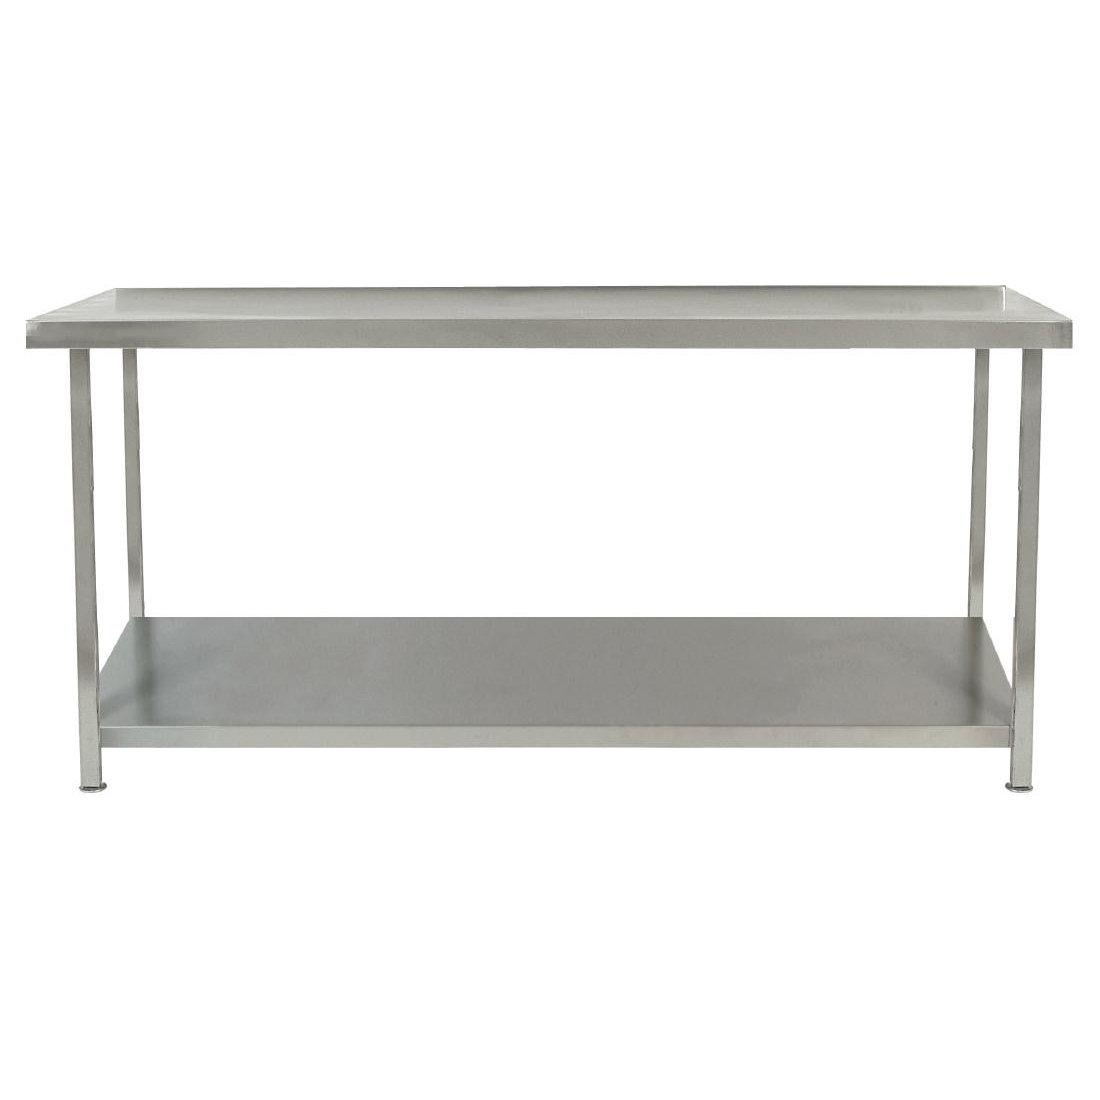 Parry Fully Welded Stainless Steel Centre Table with Undershelf 900x600mm